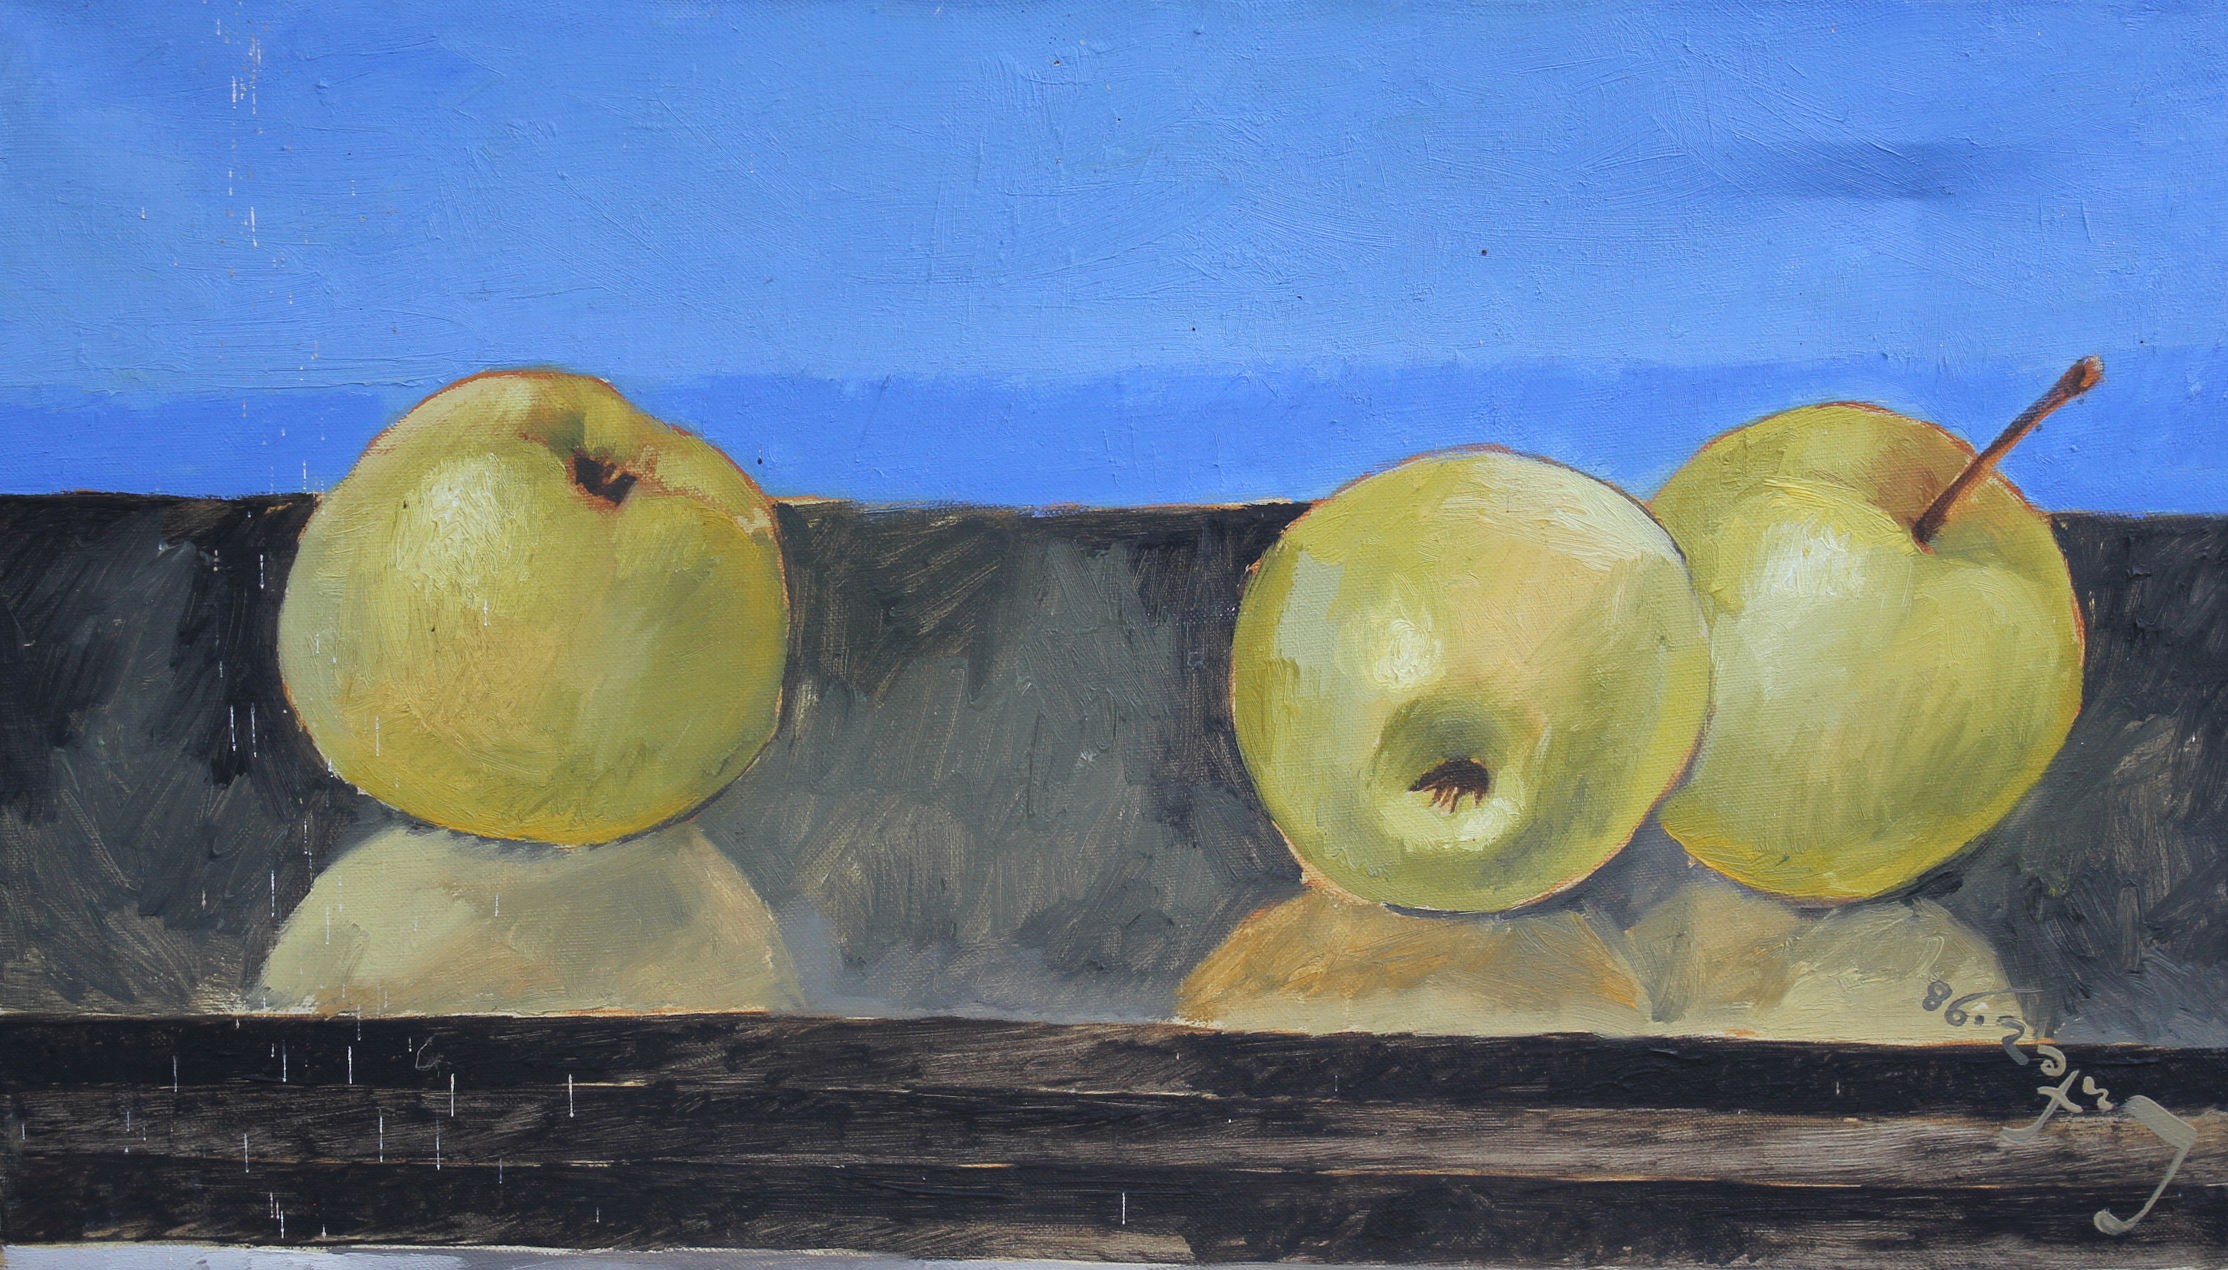 Apples and the sea